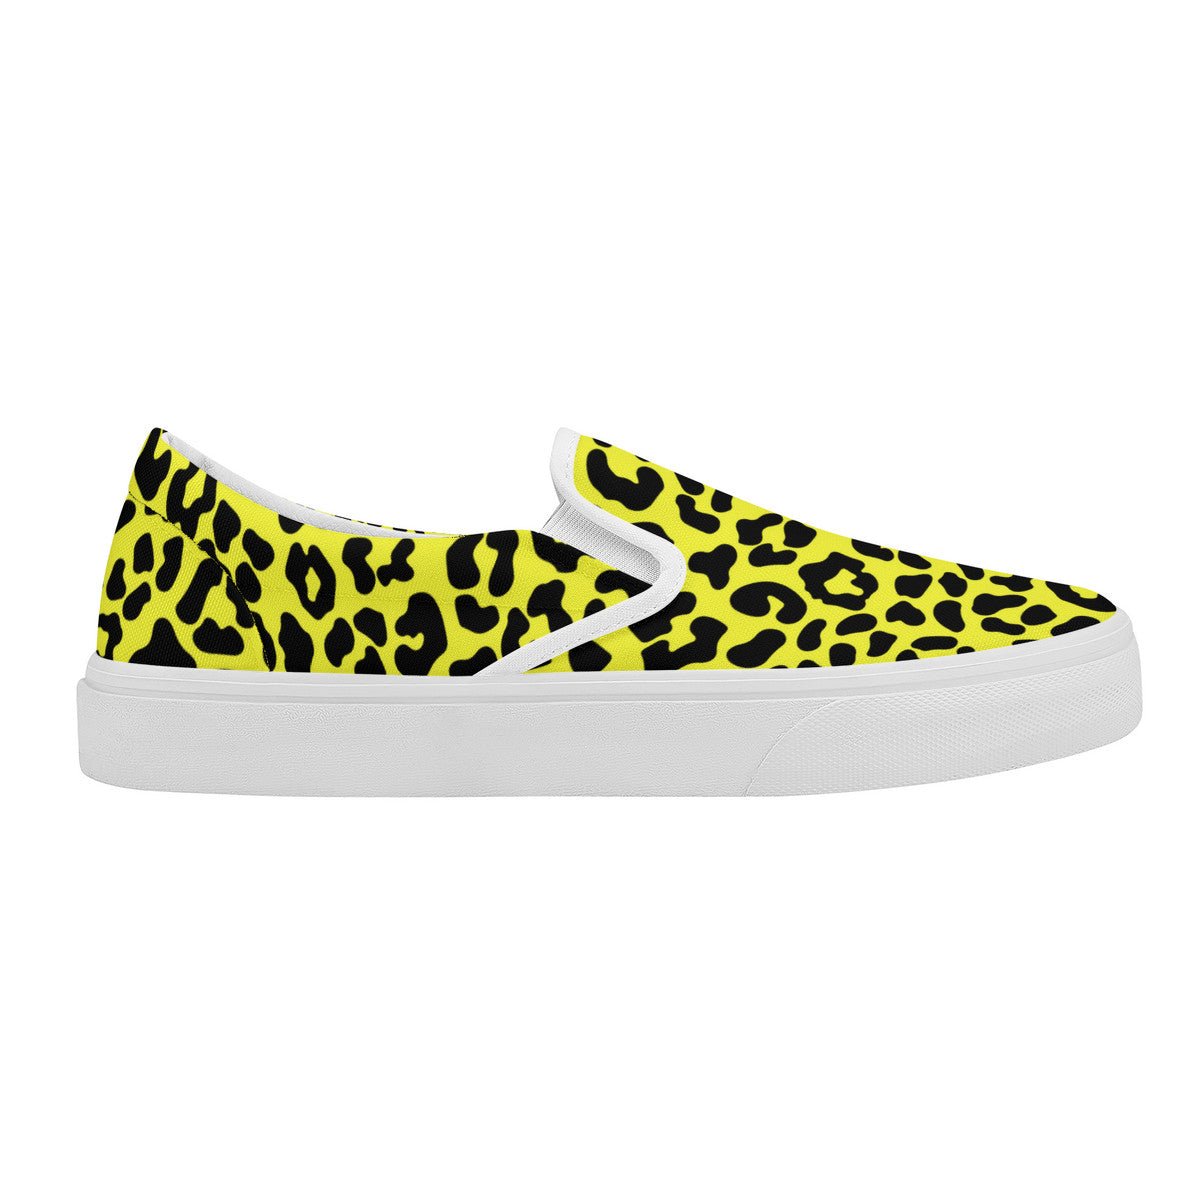 MELLA YELLOW Slip On Sneakers | Outfique | Slip-on shoes | flat shoe